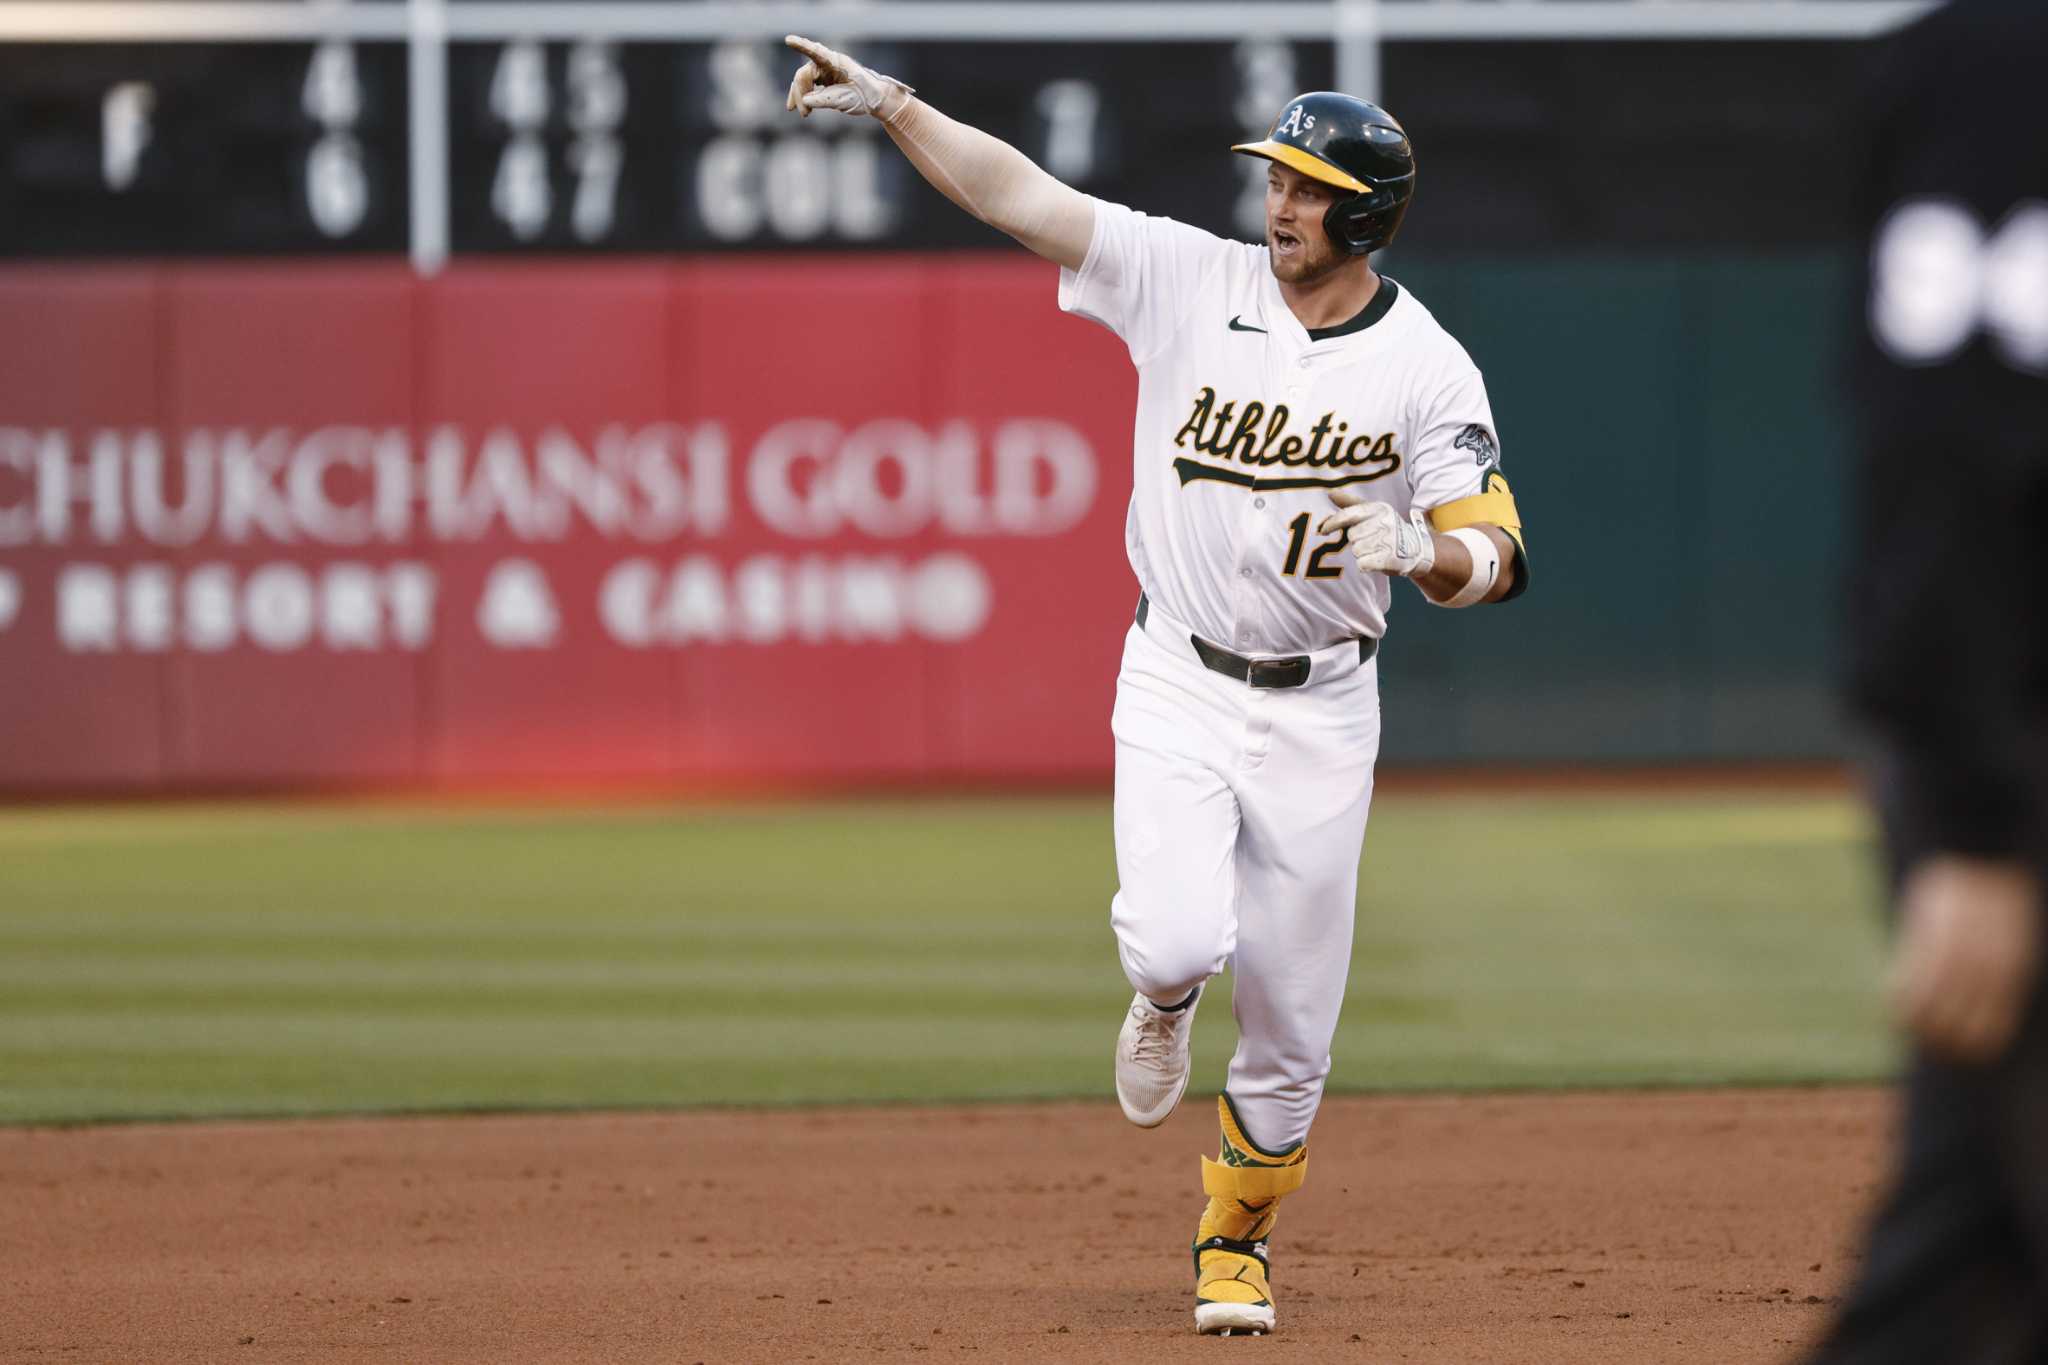 Schuemann homers, drives in 4 and Athletics beat Angels 13-3